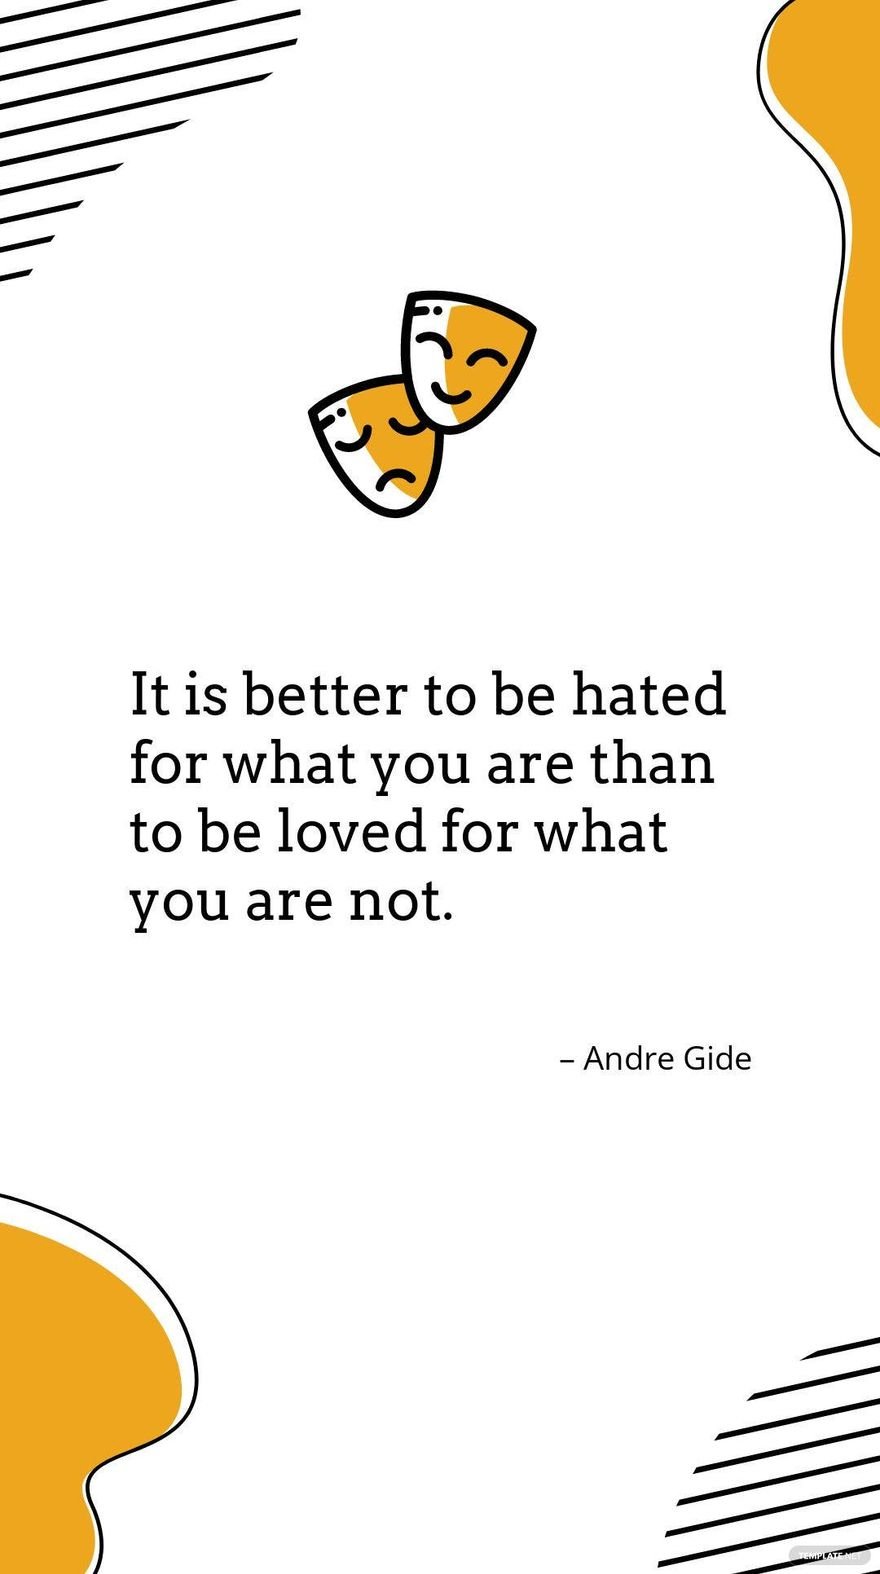  Andre Gide - “It is better to be hated for what you are than to be loved for what you are not.”